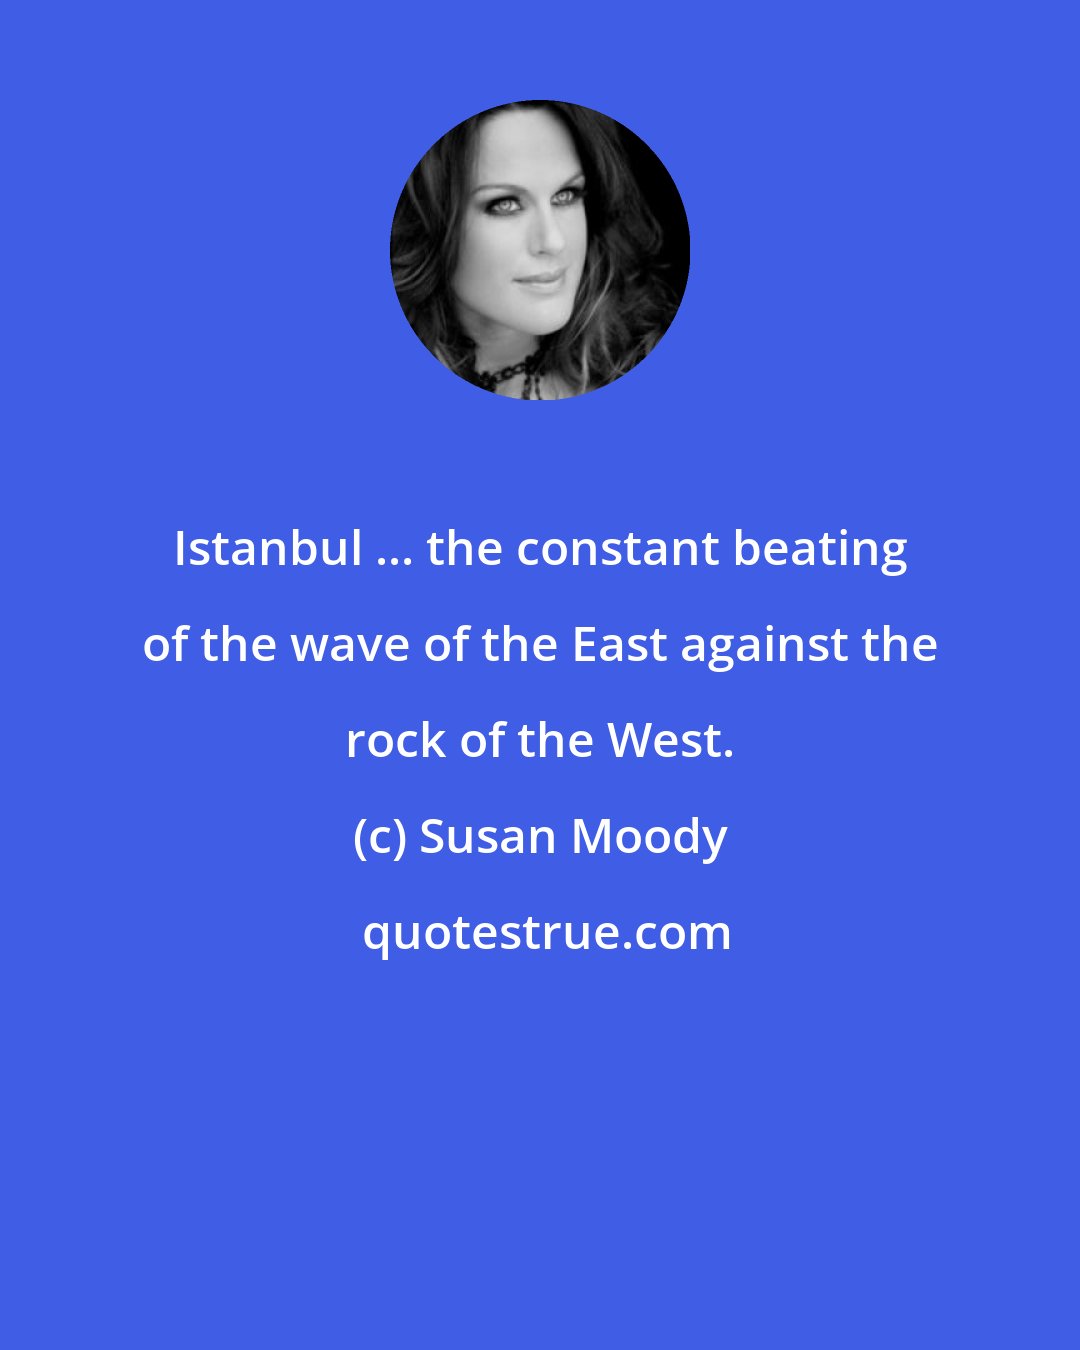 Susan Moody: Istanbul ... the constant beating of the wave of the East against the rock of the West.